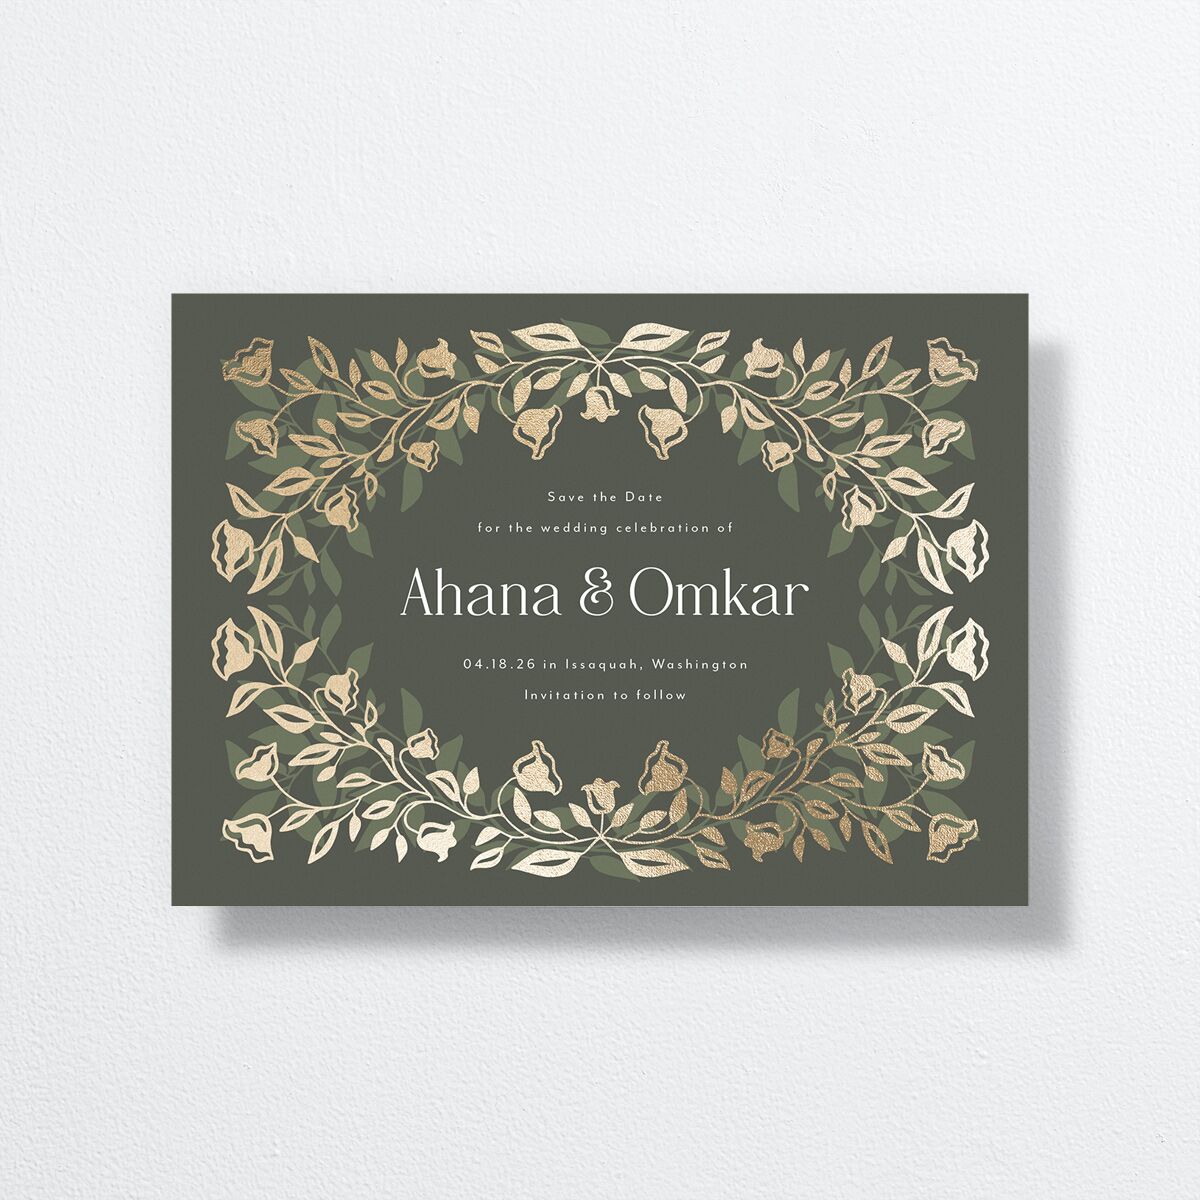 Rustic Nouveau Save the Date Cards front in green